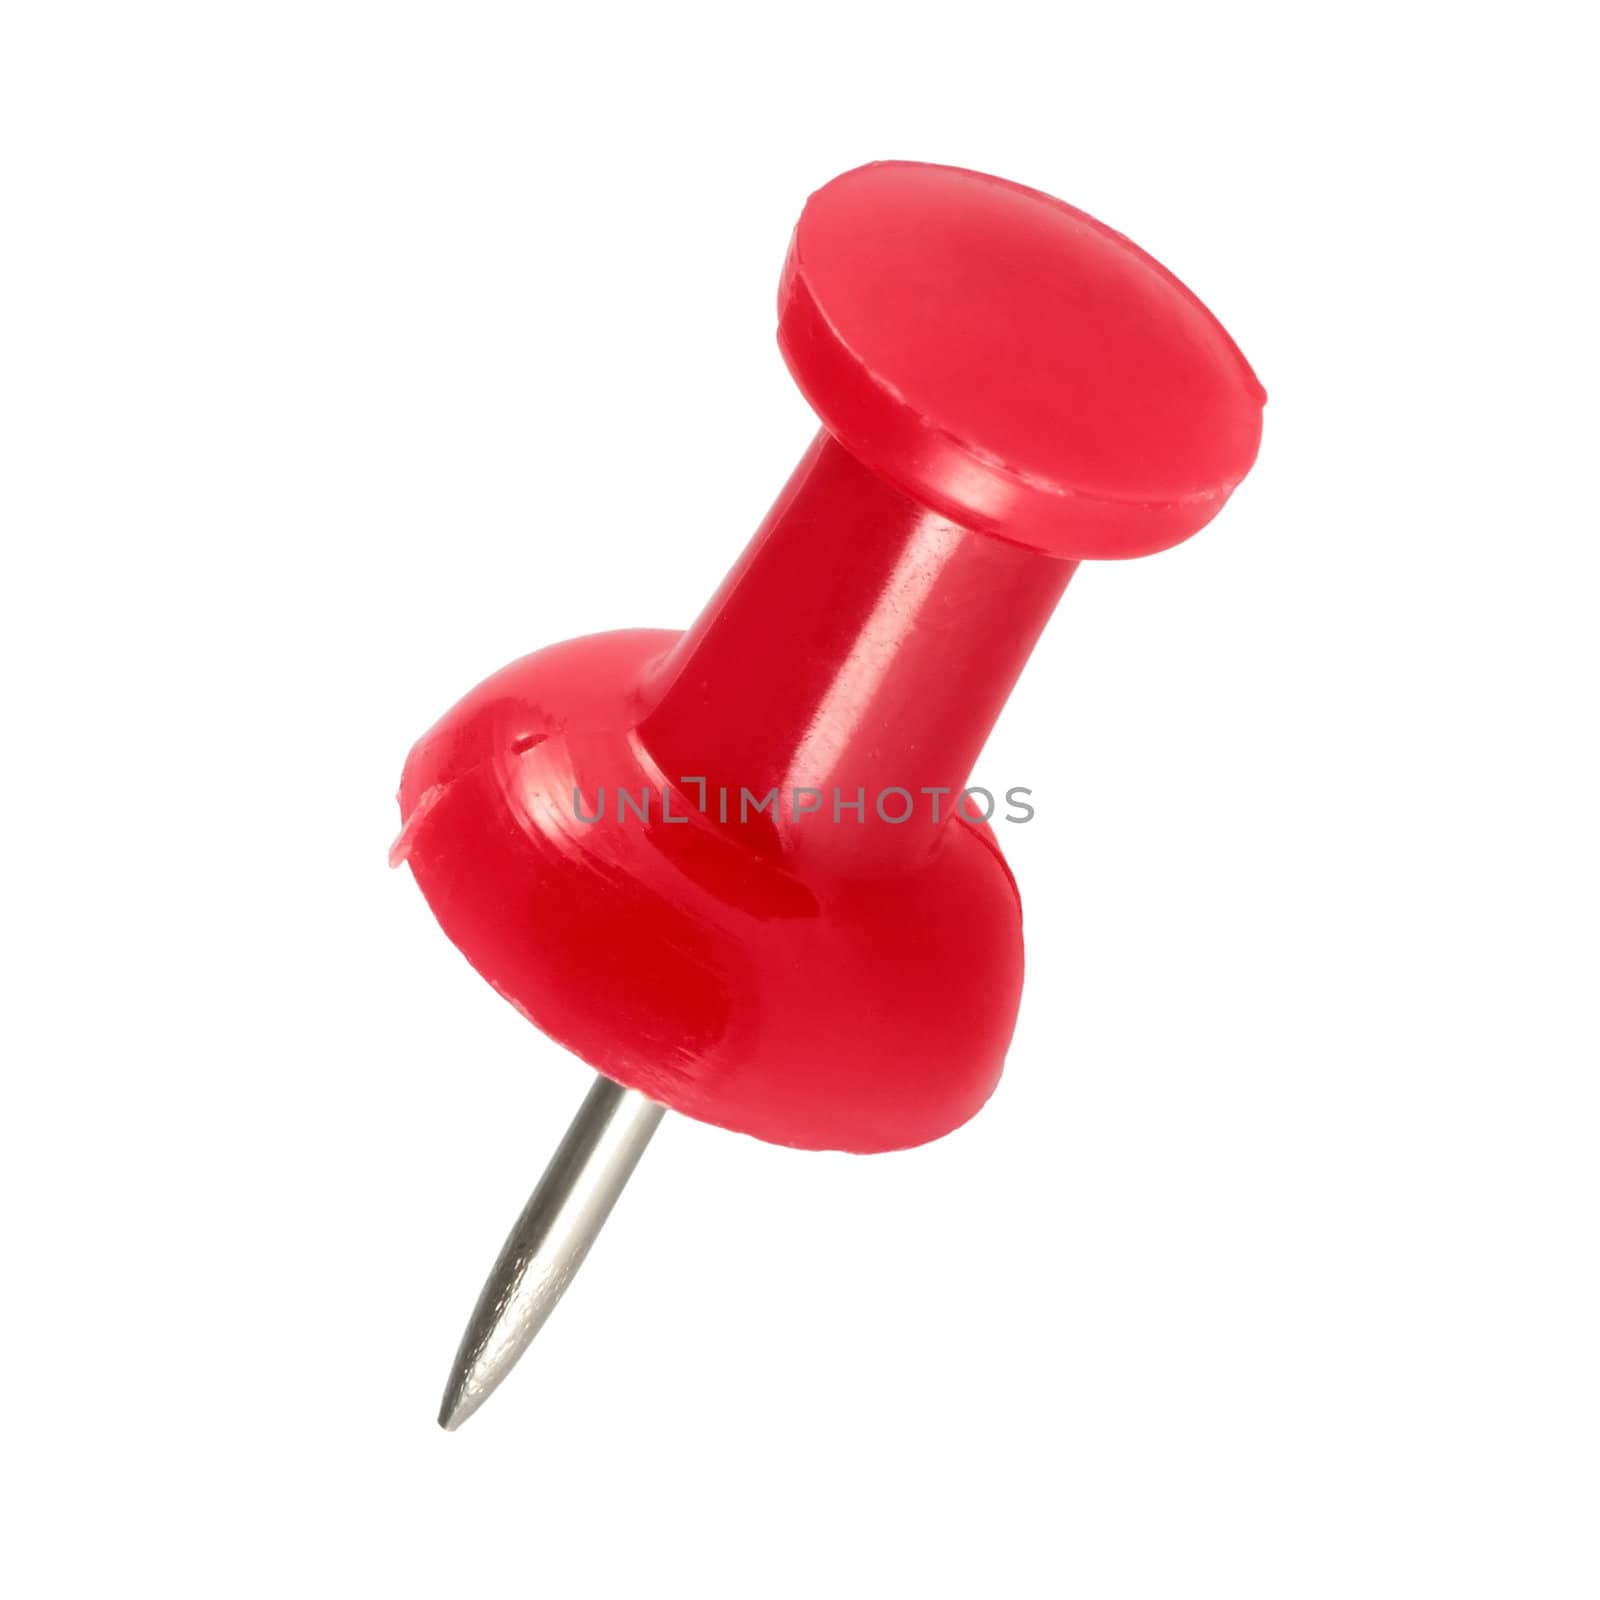 pushpin office color red trimmed and isolated